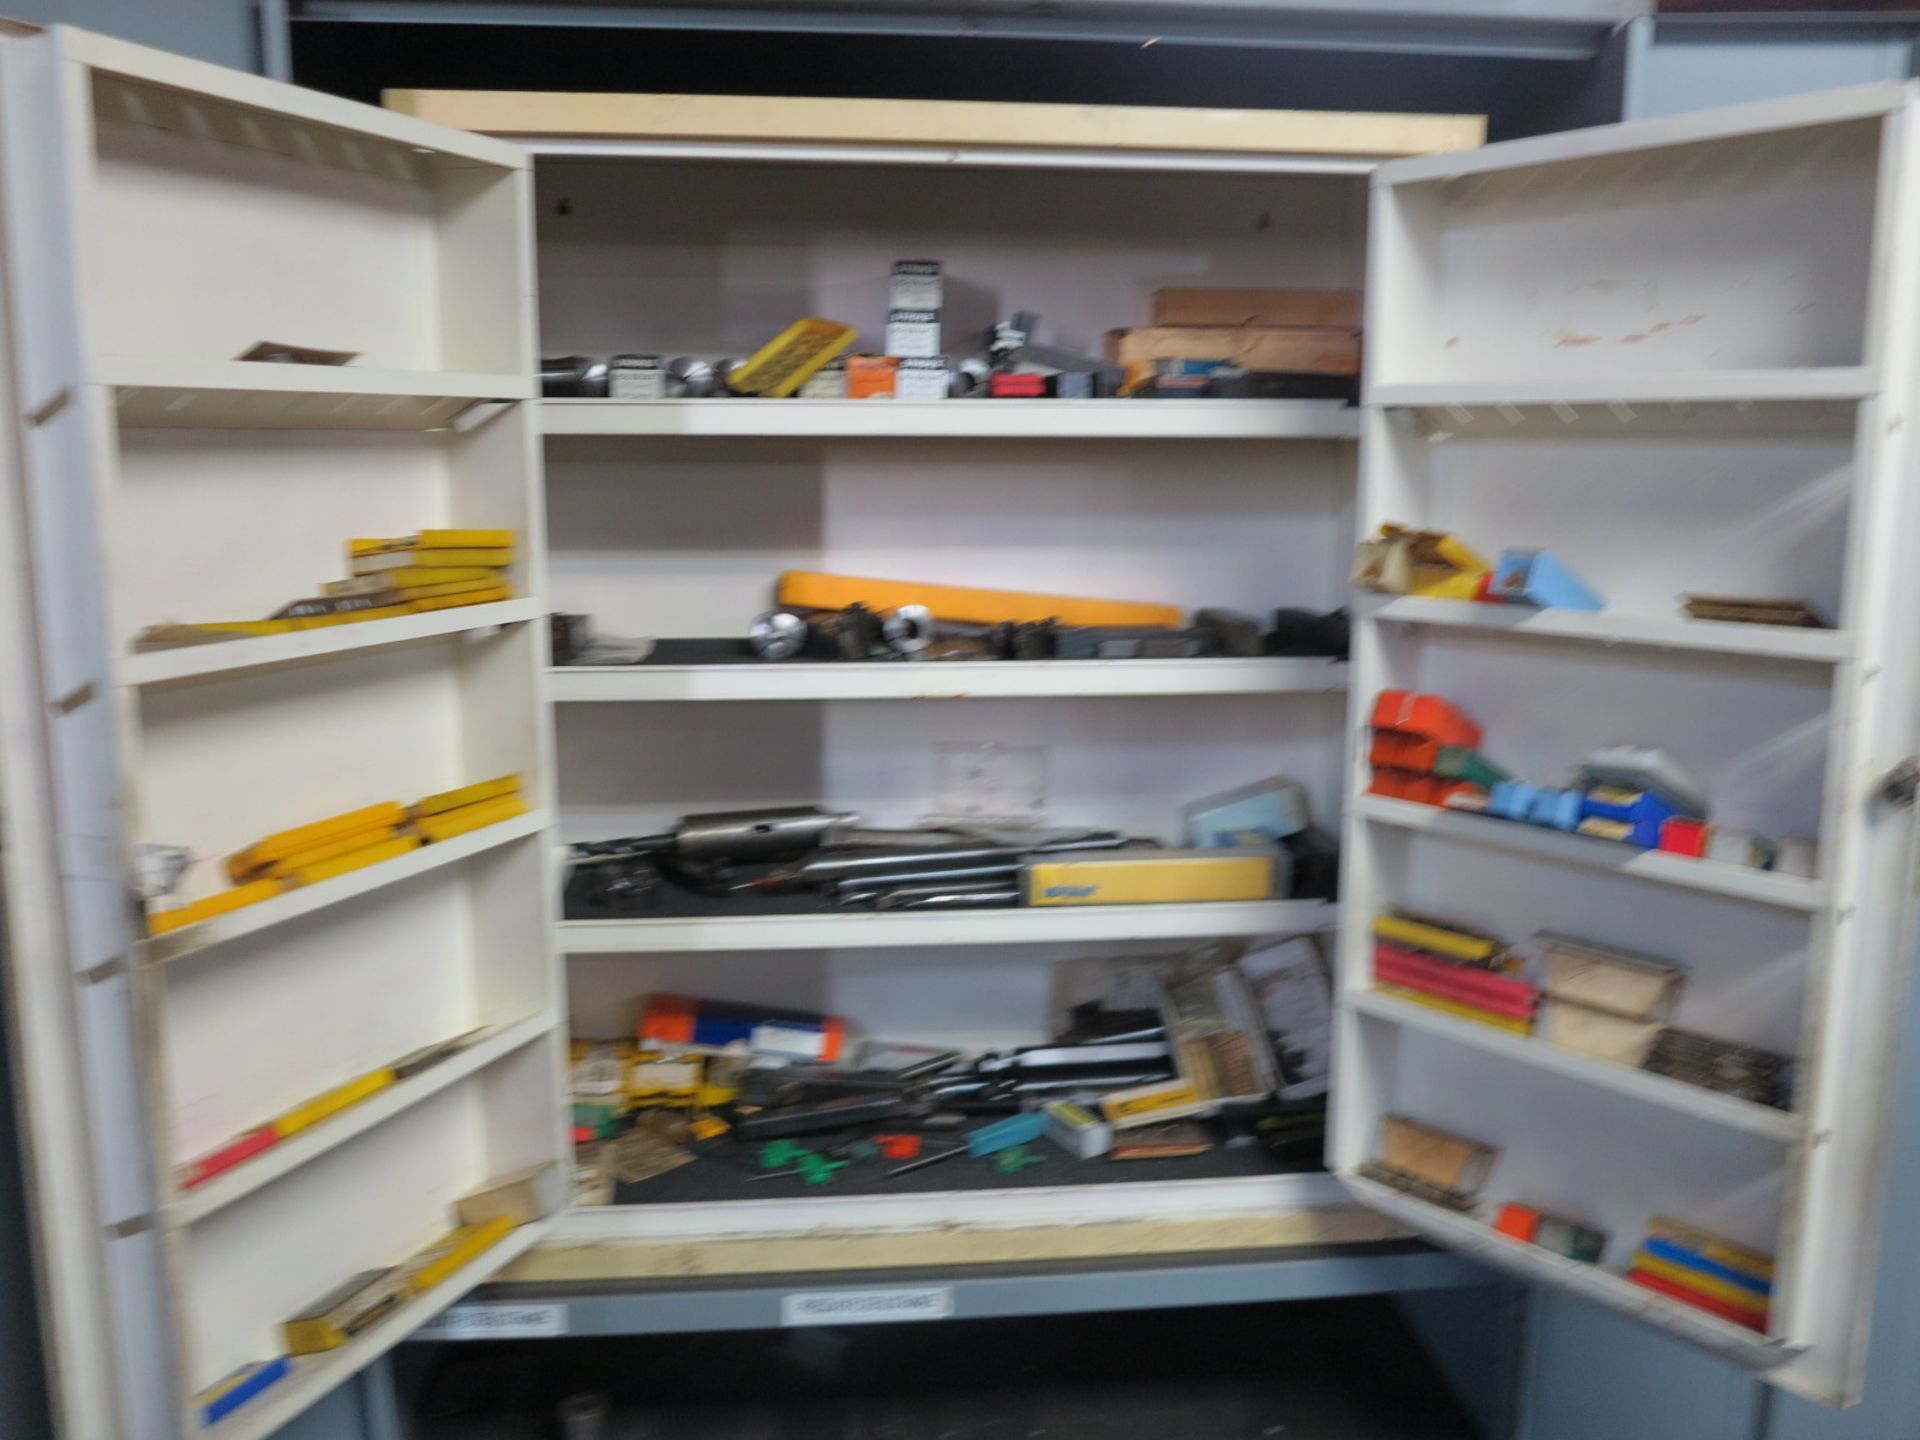 LOT - SMALL 2-DOOR CABINET FULL OF LATHE TOOLING, INSERTS, 5C COLLETS, BORING BARS, ETC. - Image 2 of 5